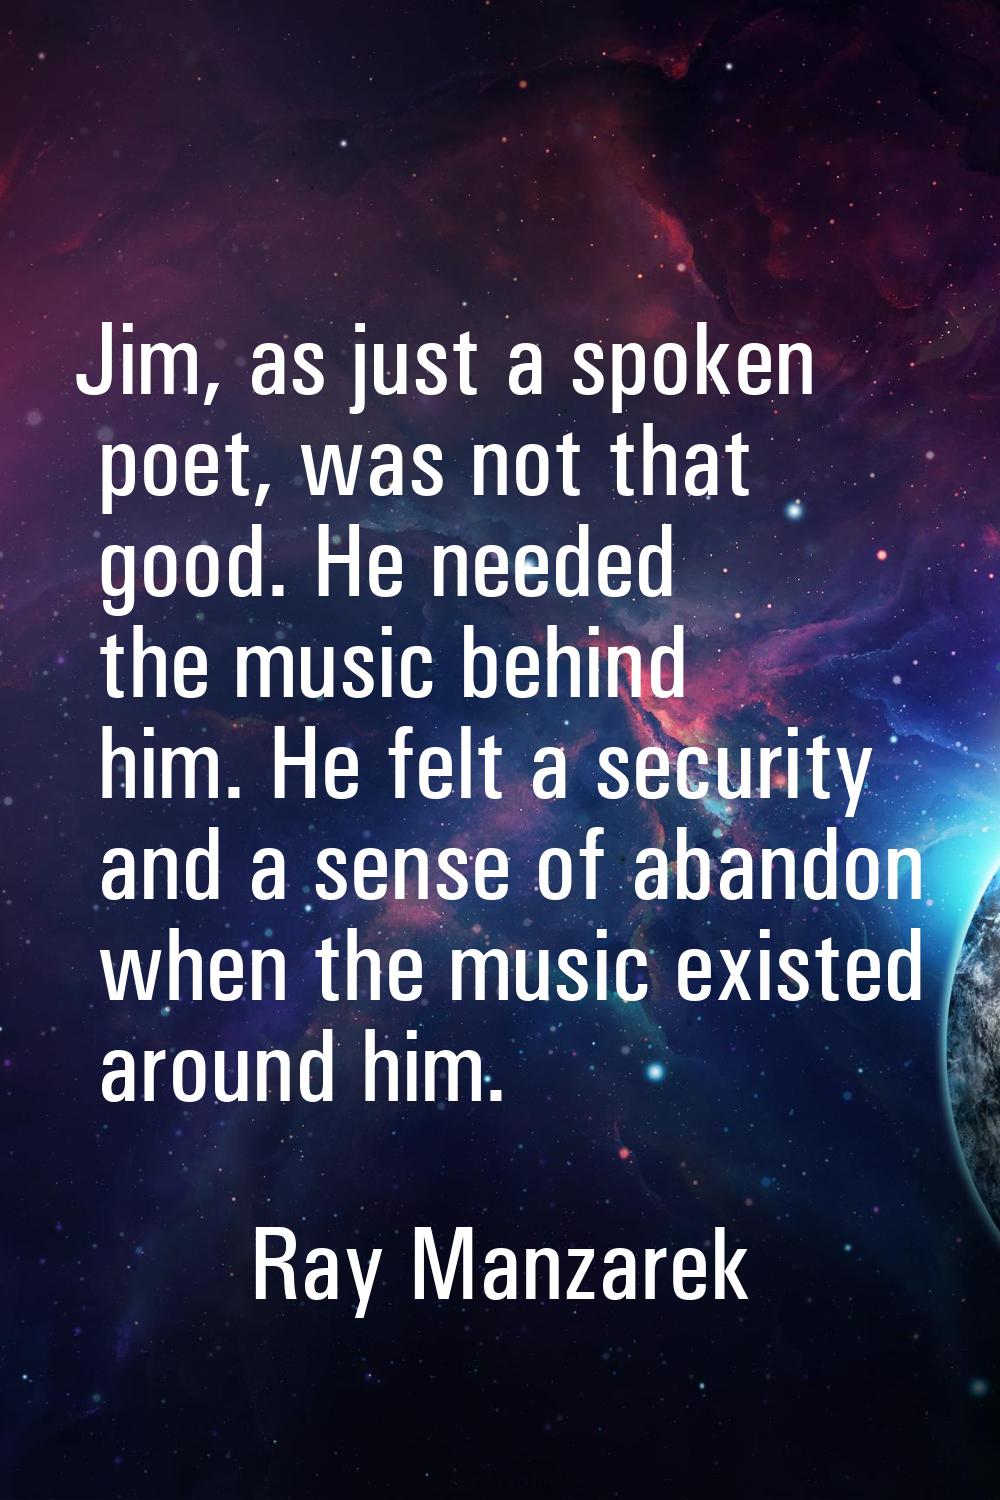 Jim, as just a spoken poet, was not that good. He needed the music behind him. He felt a security a